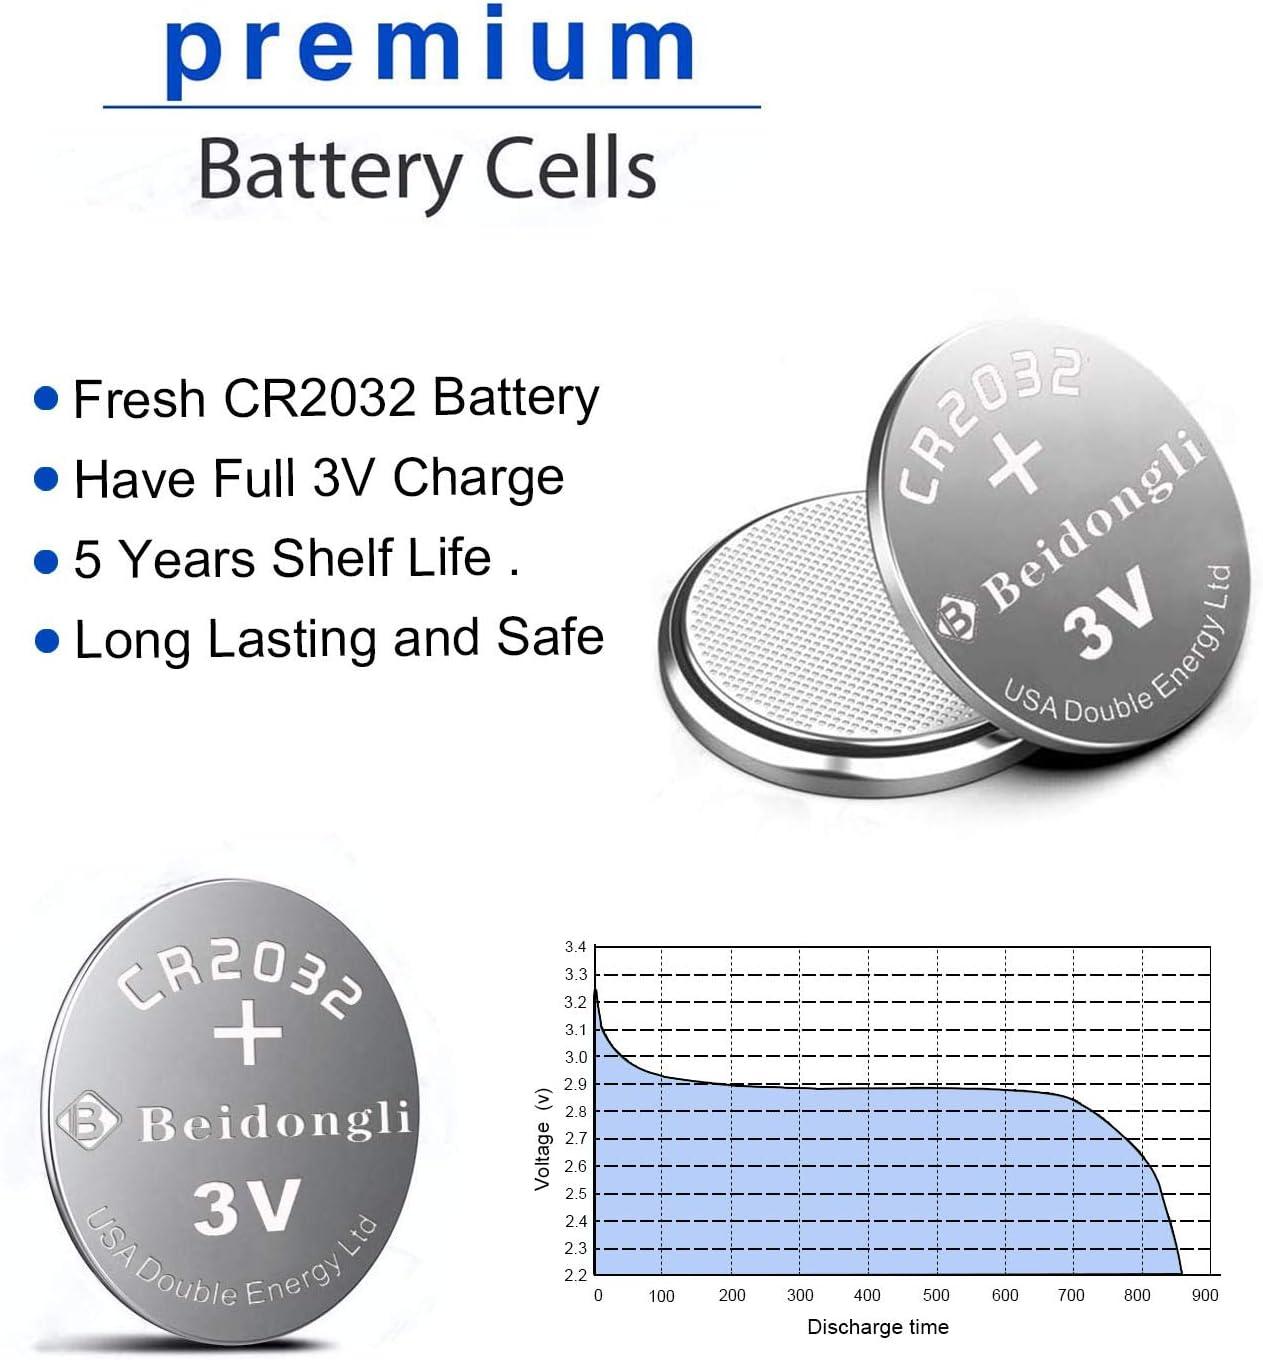 New 10PCS CR1620 3V Lithium Batteries Environmental Protection Button  Battery for Car Key Remote Control